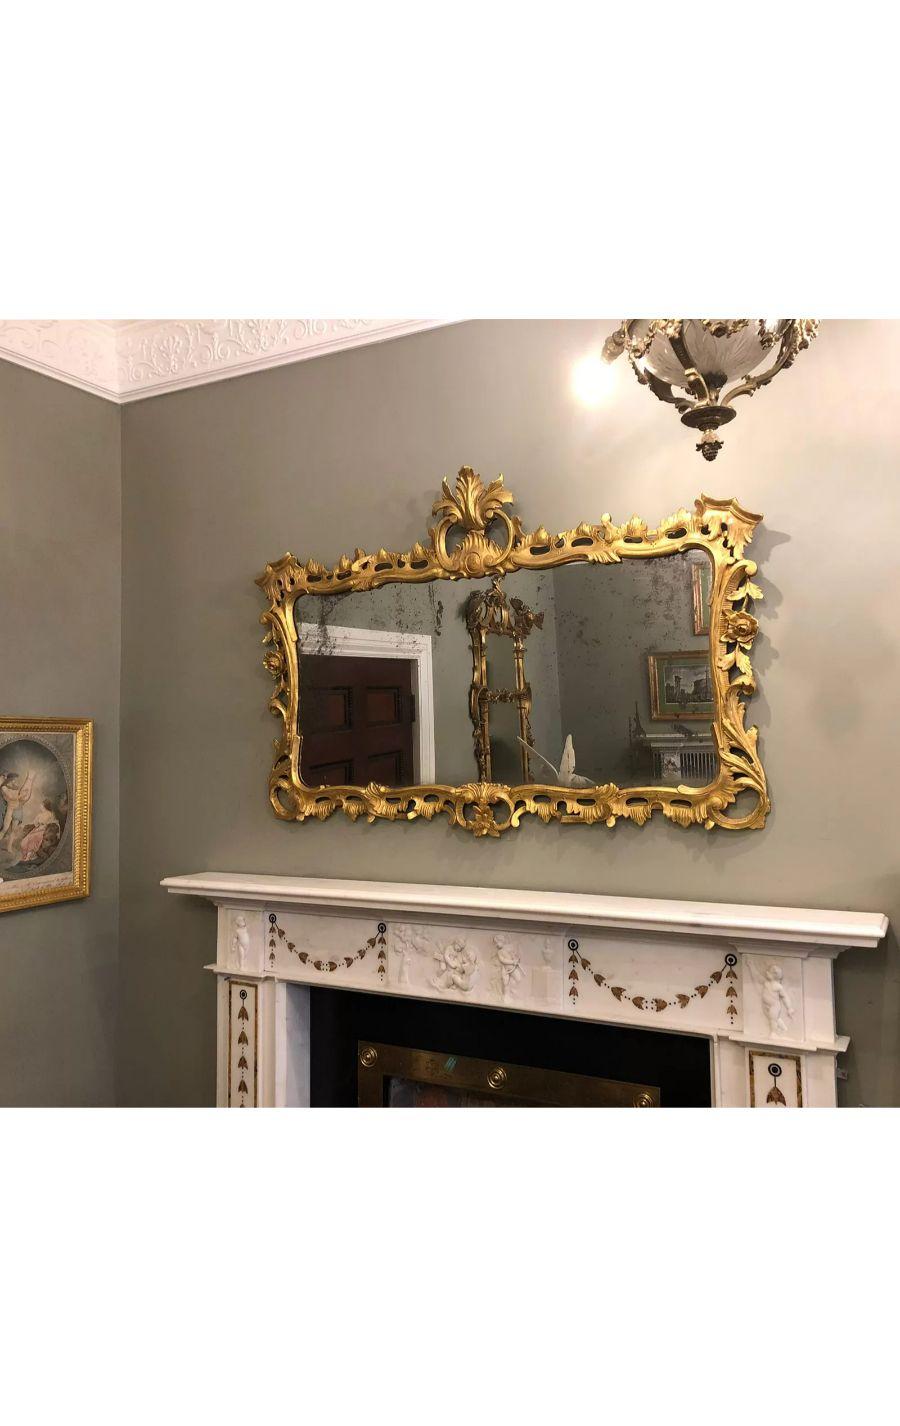 Antique carved gilt-wood mirror in the Rococo revival style.

The gold gilt wooden frame, exuberantly carved in the Rococo manner, with acanthus, foliage and scroll-work.

A great shape for above a mantelpiece or side table.

Retaining its original